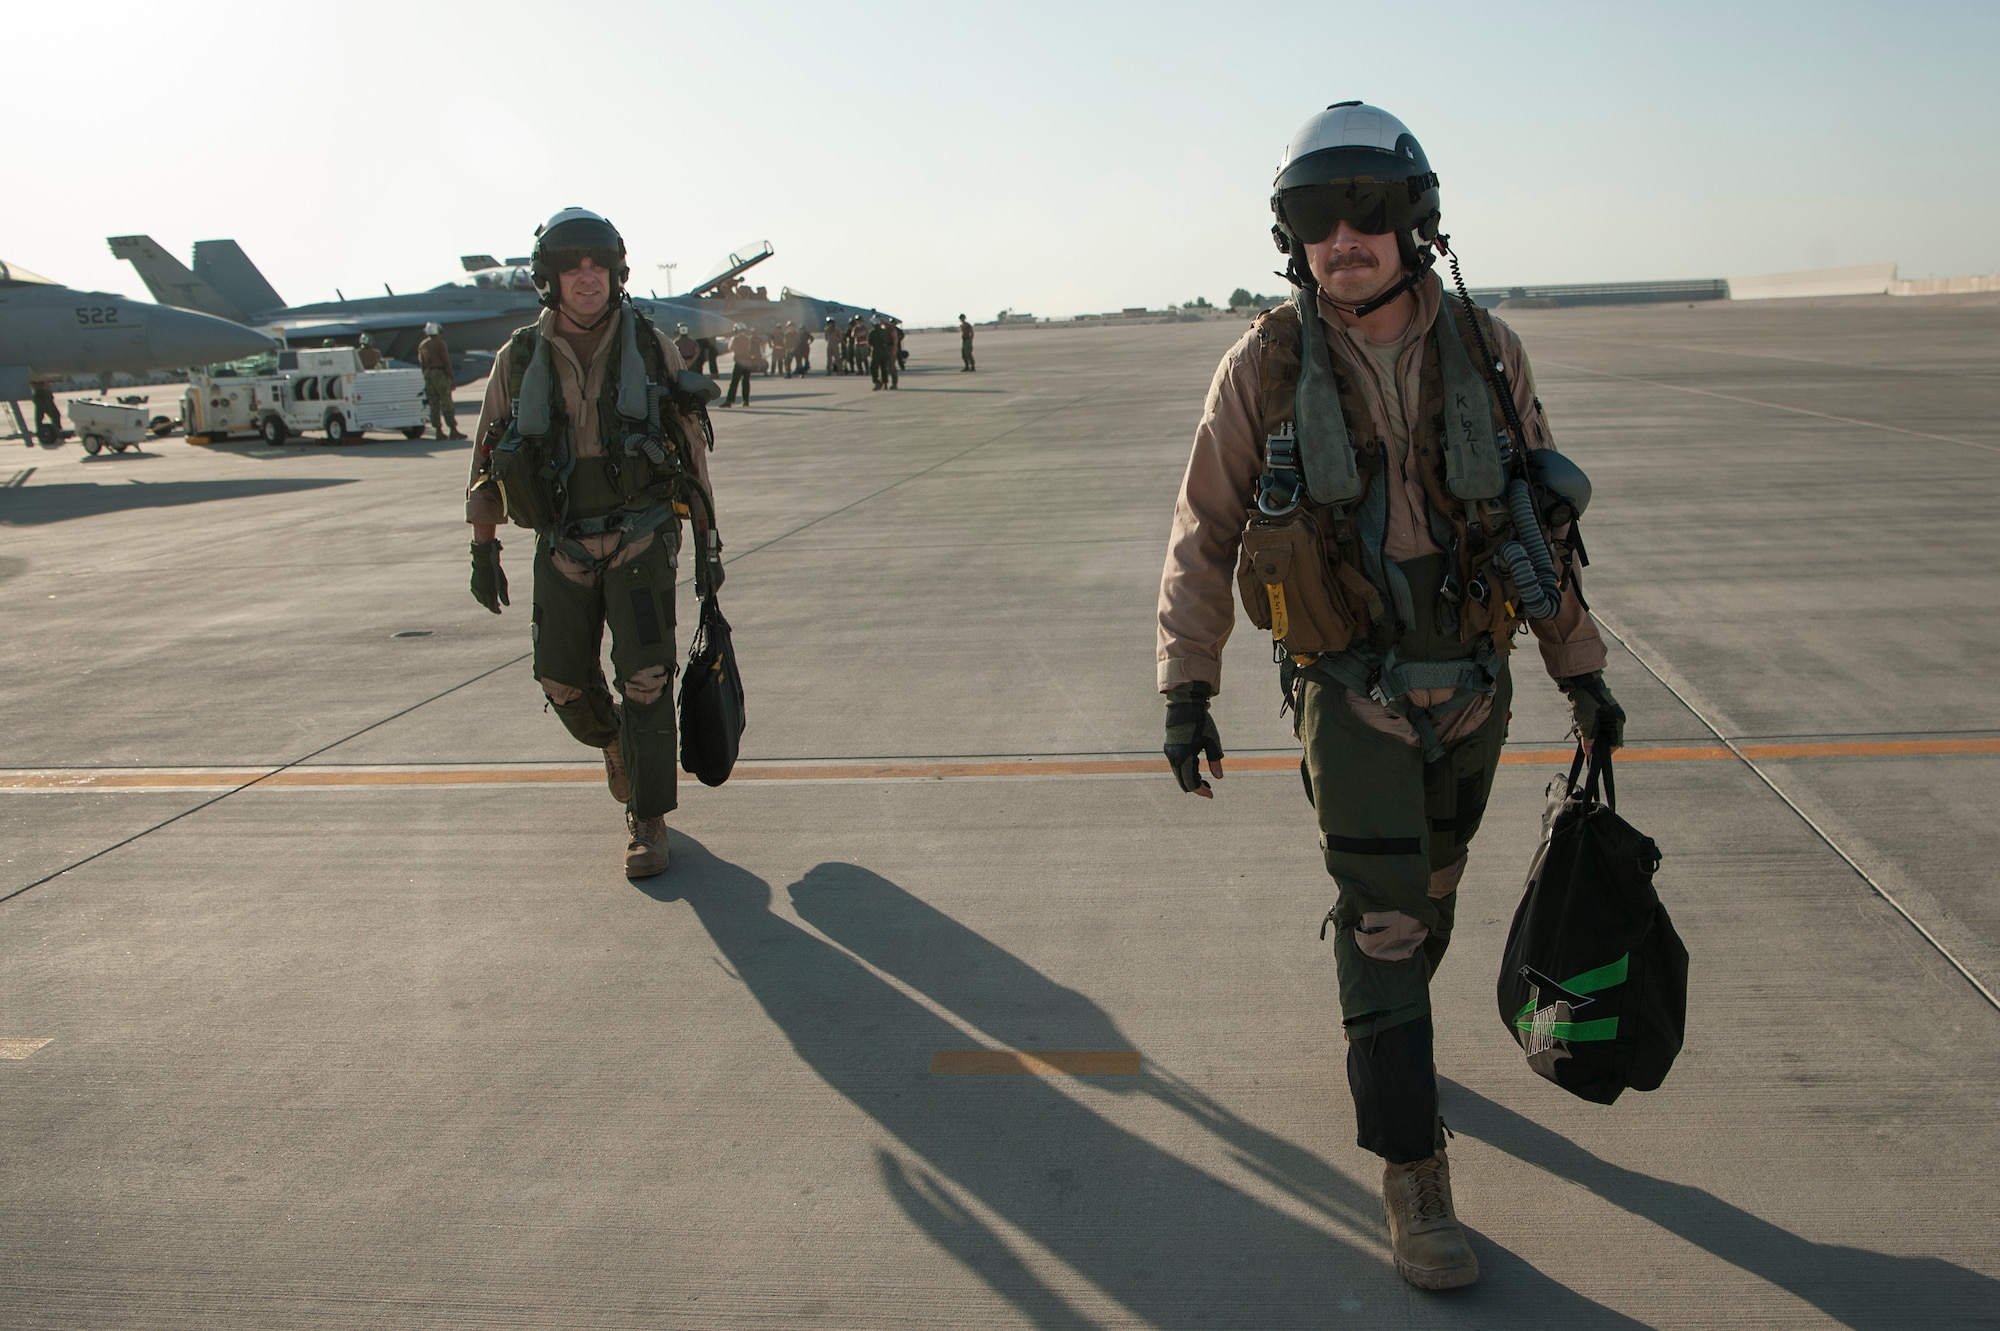 U.S. Navy Cmdr. Steve Shauberger (left), Electronic Attack Squadron 135 (VAQ-135) “Black Ravens” commander, and U.S. Air Force 1st Lt. Jonathan Wright, 390th Electronic Combat Squadron and VAQ-135 EA-18G Growler pilot, make their way across the flightline after Wright’s first combat flight Nov. 19, 2018, at Al Udeid Air Base, Qatar. Wright is the first Air Force pilot to operate a Growler during a combat mission. VAQ-135 is deployed to the U.S. 5th Fleet area of operations in support of naval operations to ensure maritime stability and security in the Central Region, connecting the Mediterranean and the Pacific through the western Indian Ocean and three strategic choke points. (U.S. Air Force photo by Tech. Sgt. Christopher Hubenthal)